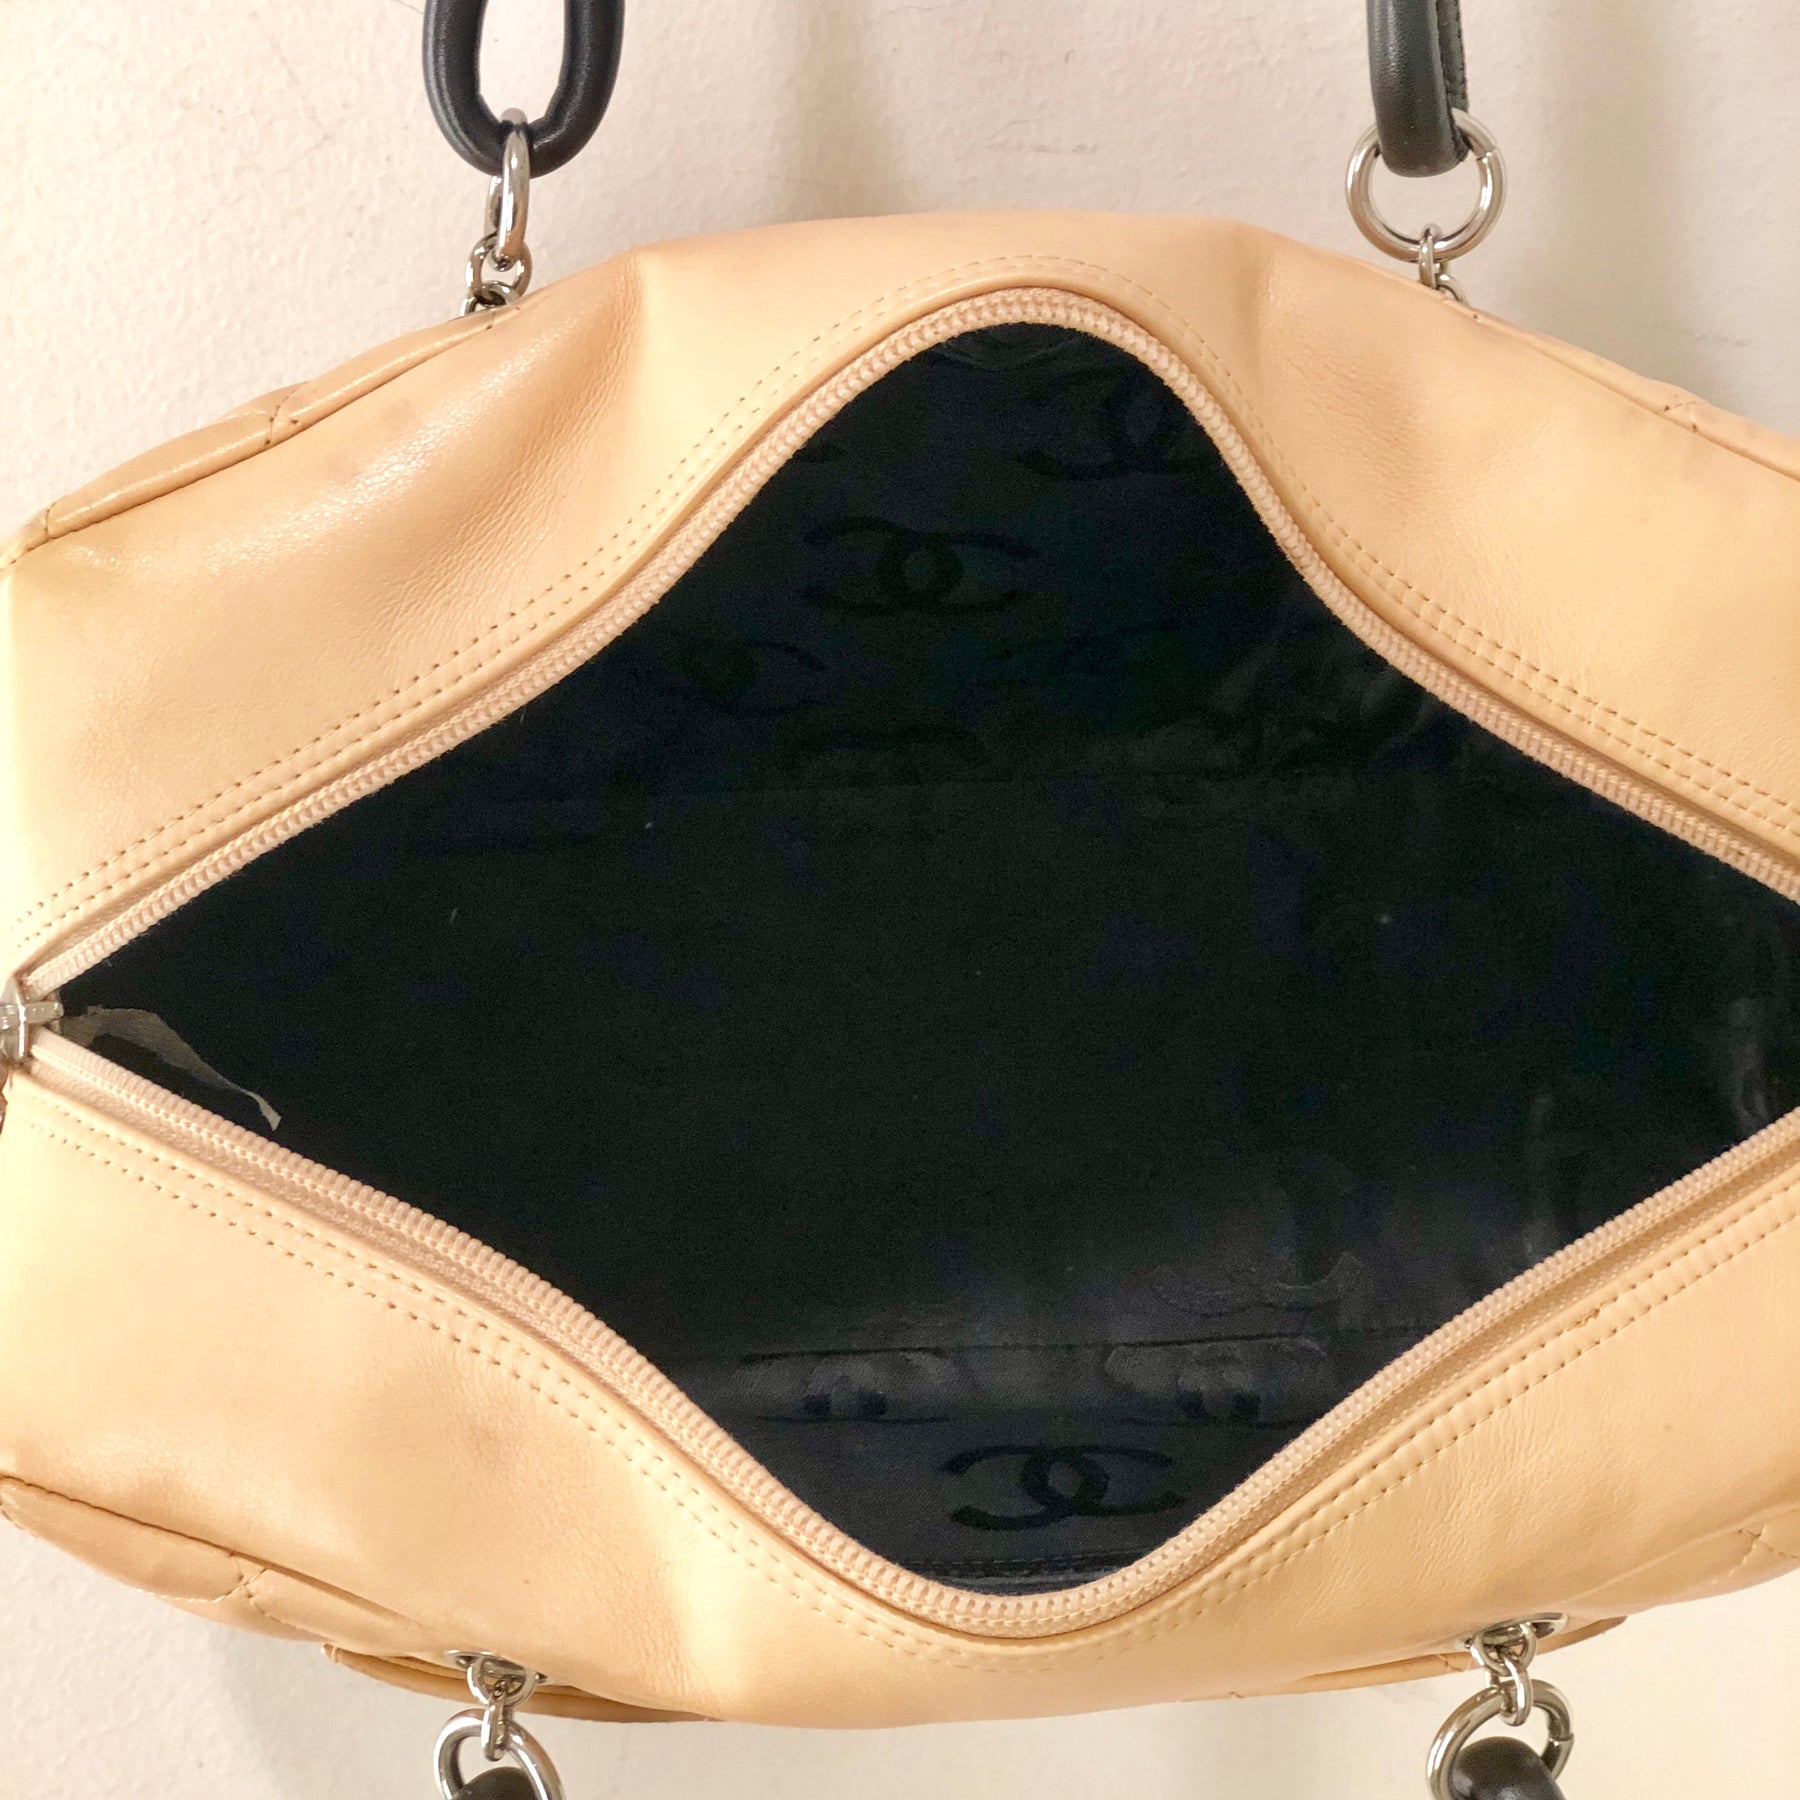 Chanel Cambon Bowler Leather Bag Tan and Black Inside of Bag